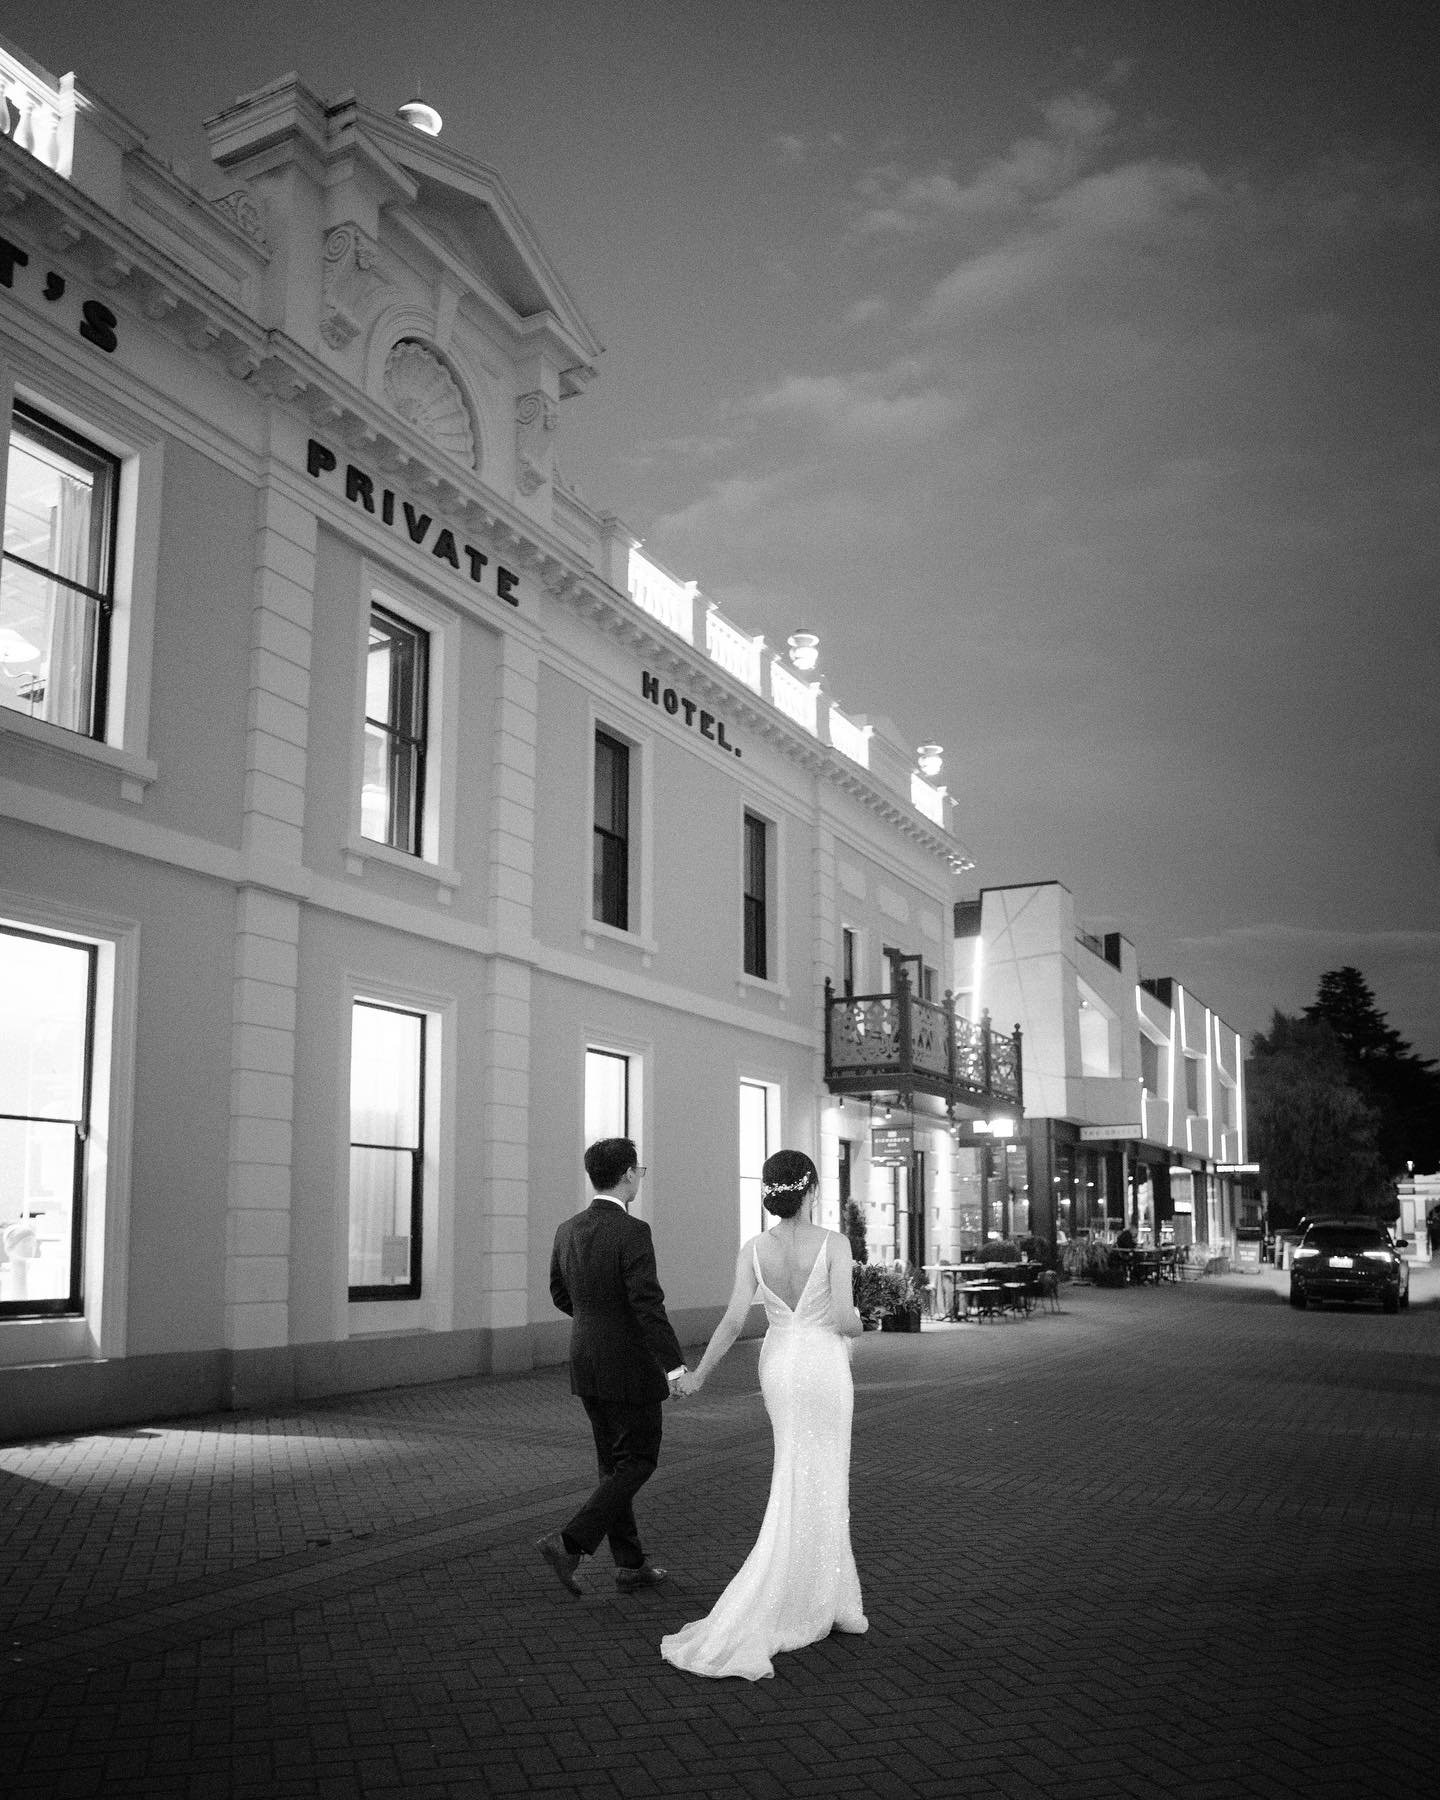 Some beautiful night photos outside the historic @eichardts hotel in Queenstown. 
.
.
.
#queenstownweddingphotographer #queenstownweddings #queenstownelopementphotographer #eichardts #togetherjournal #queenstownelopement #nzweddingphotographer #queen